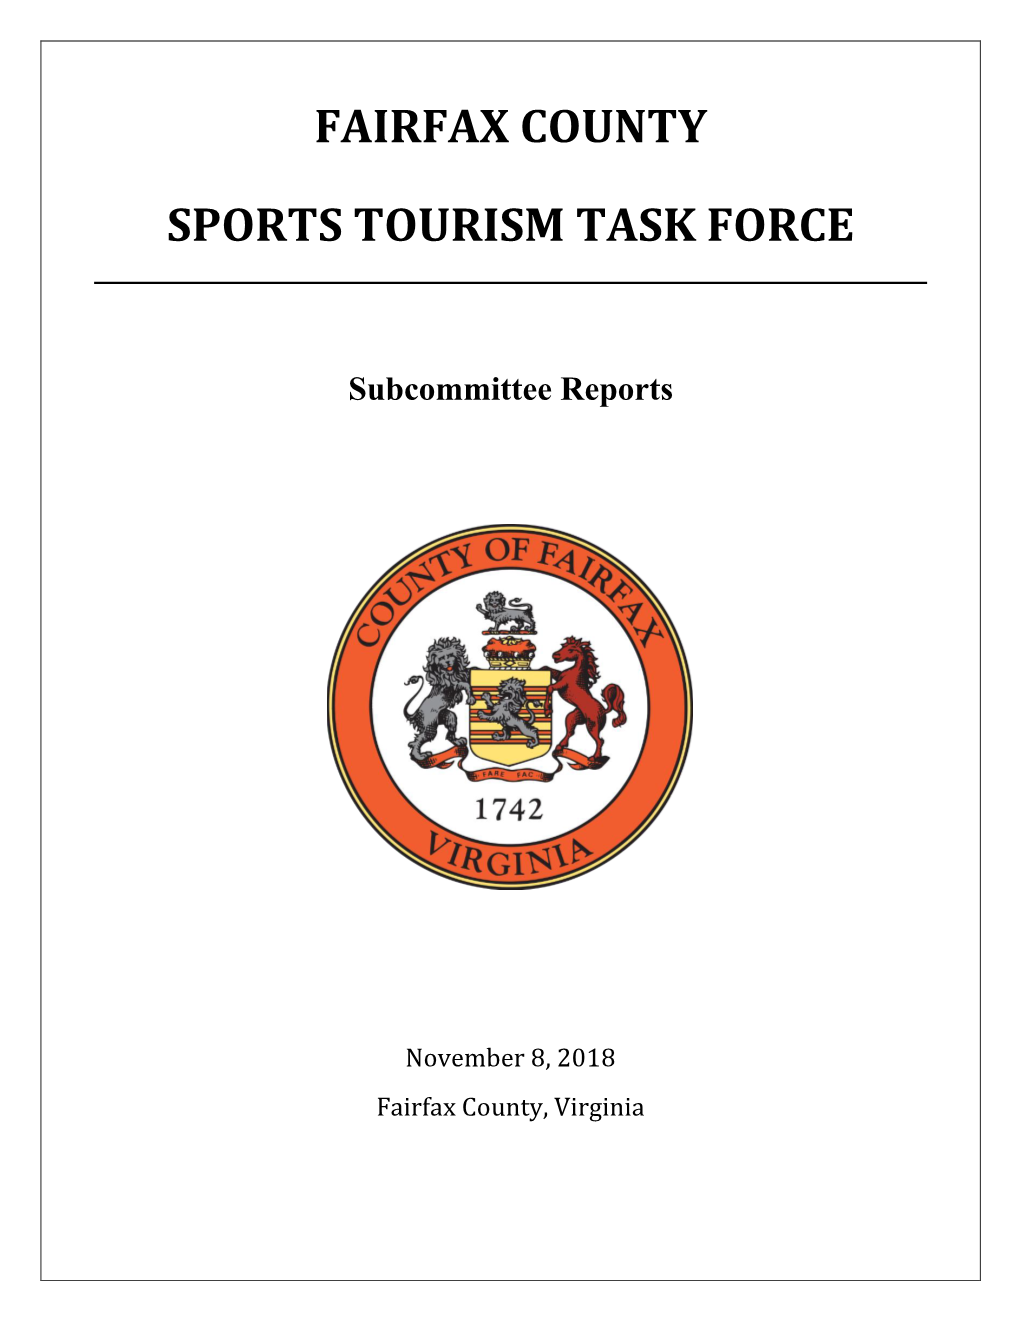 Fairfax County Sports Tourism Task Force